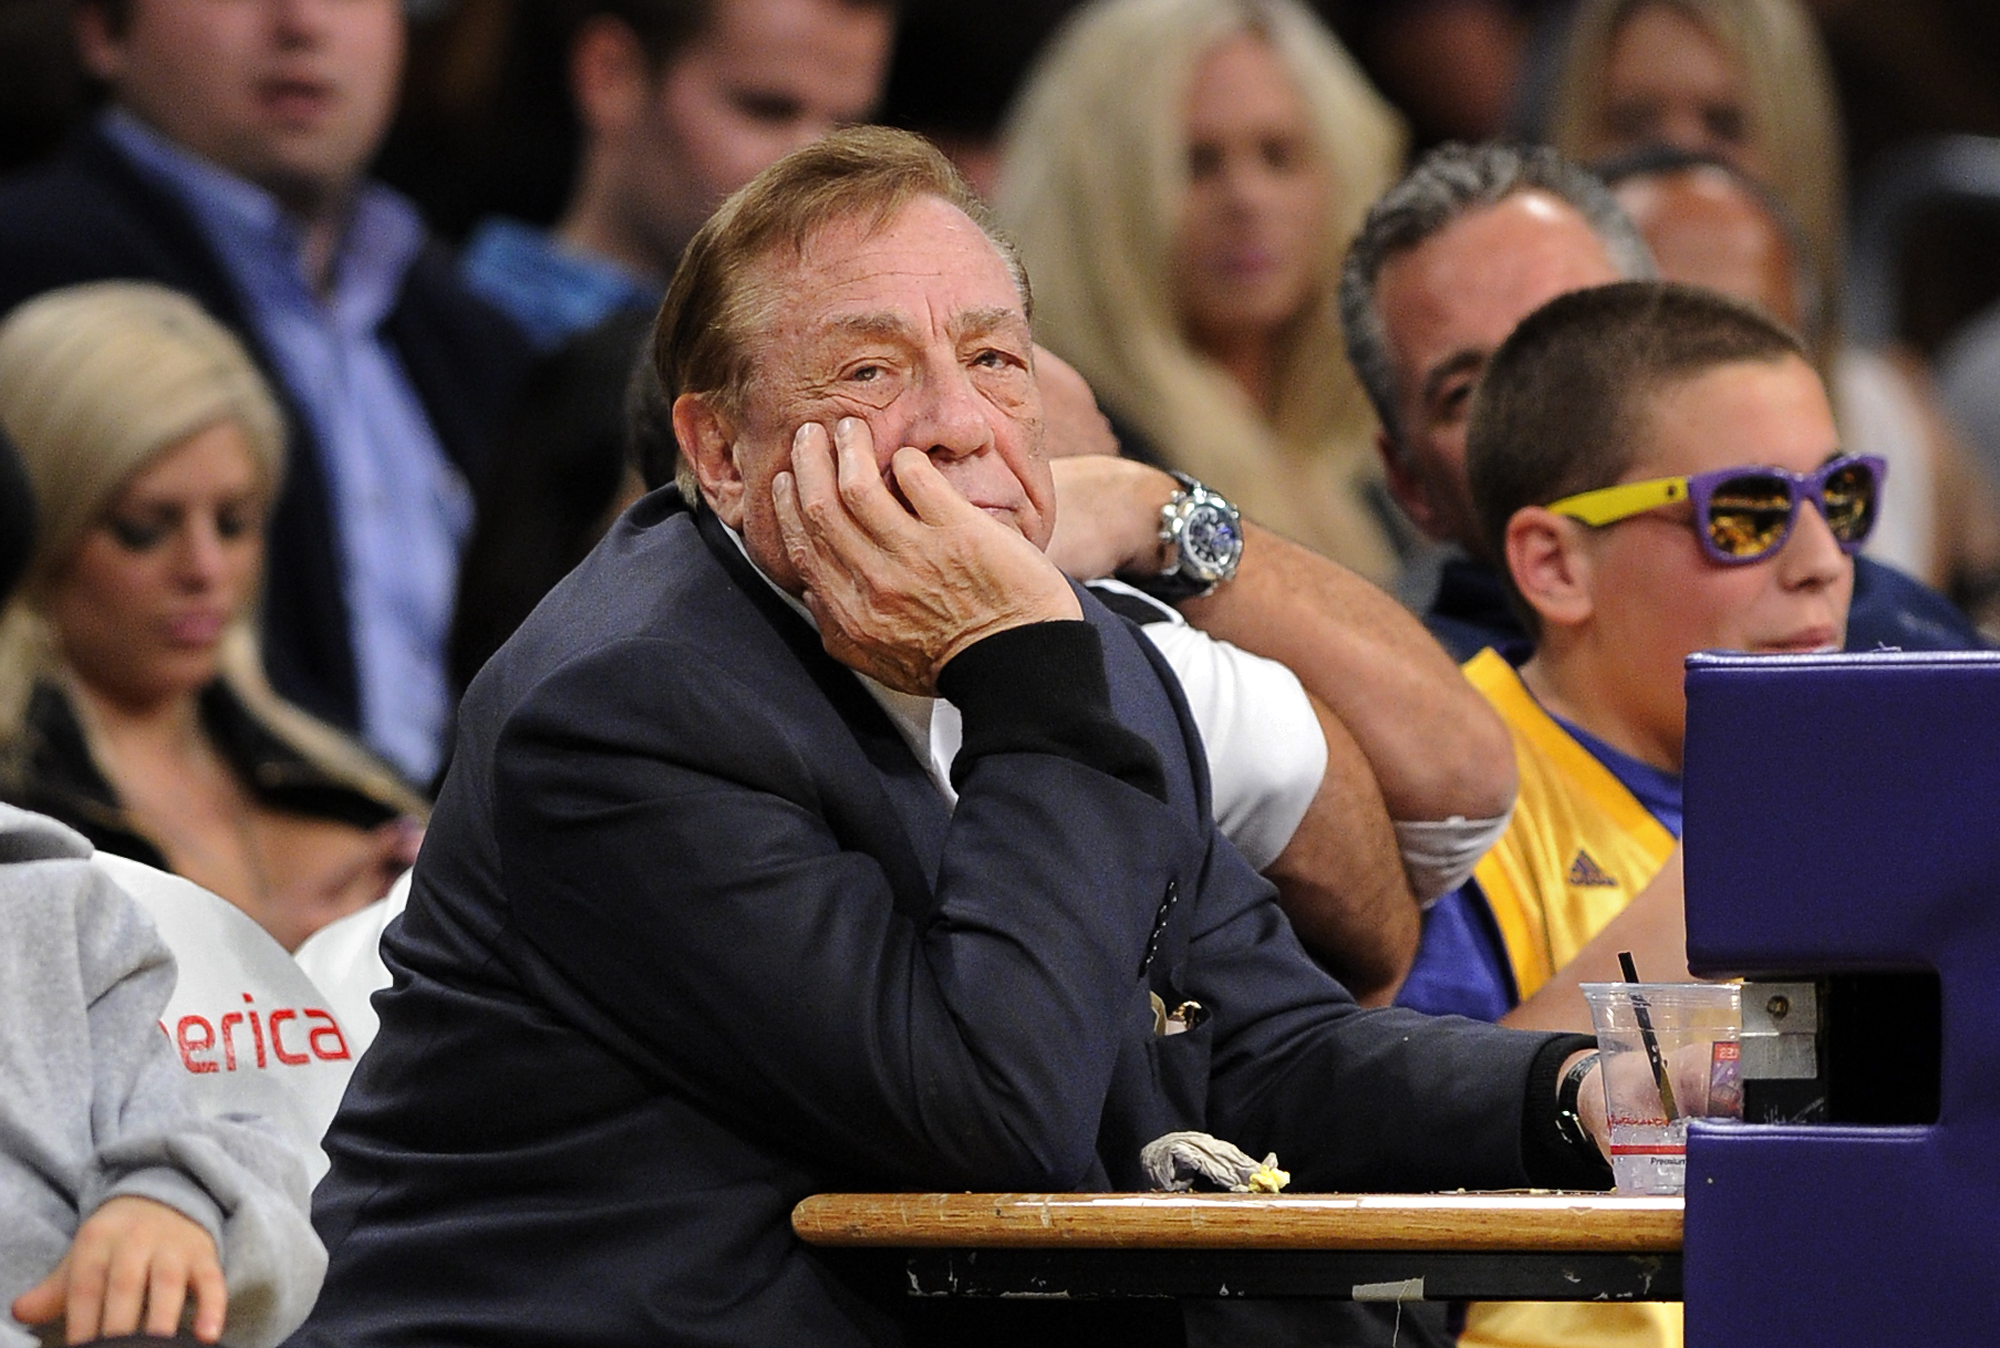 PHOTO: Los Angeles Clippers owner Donald Sterling looks on during the first half of their NBA basketball game against the Los Angeles Lakers in Los Angeles, Calif., Feb. 25, 2011.